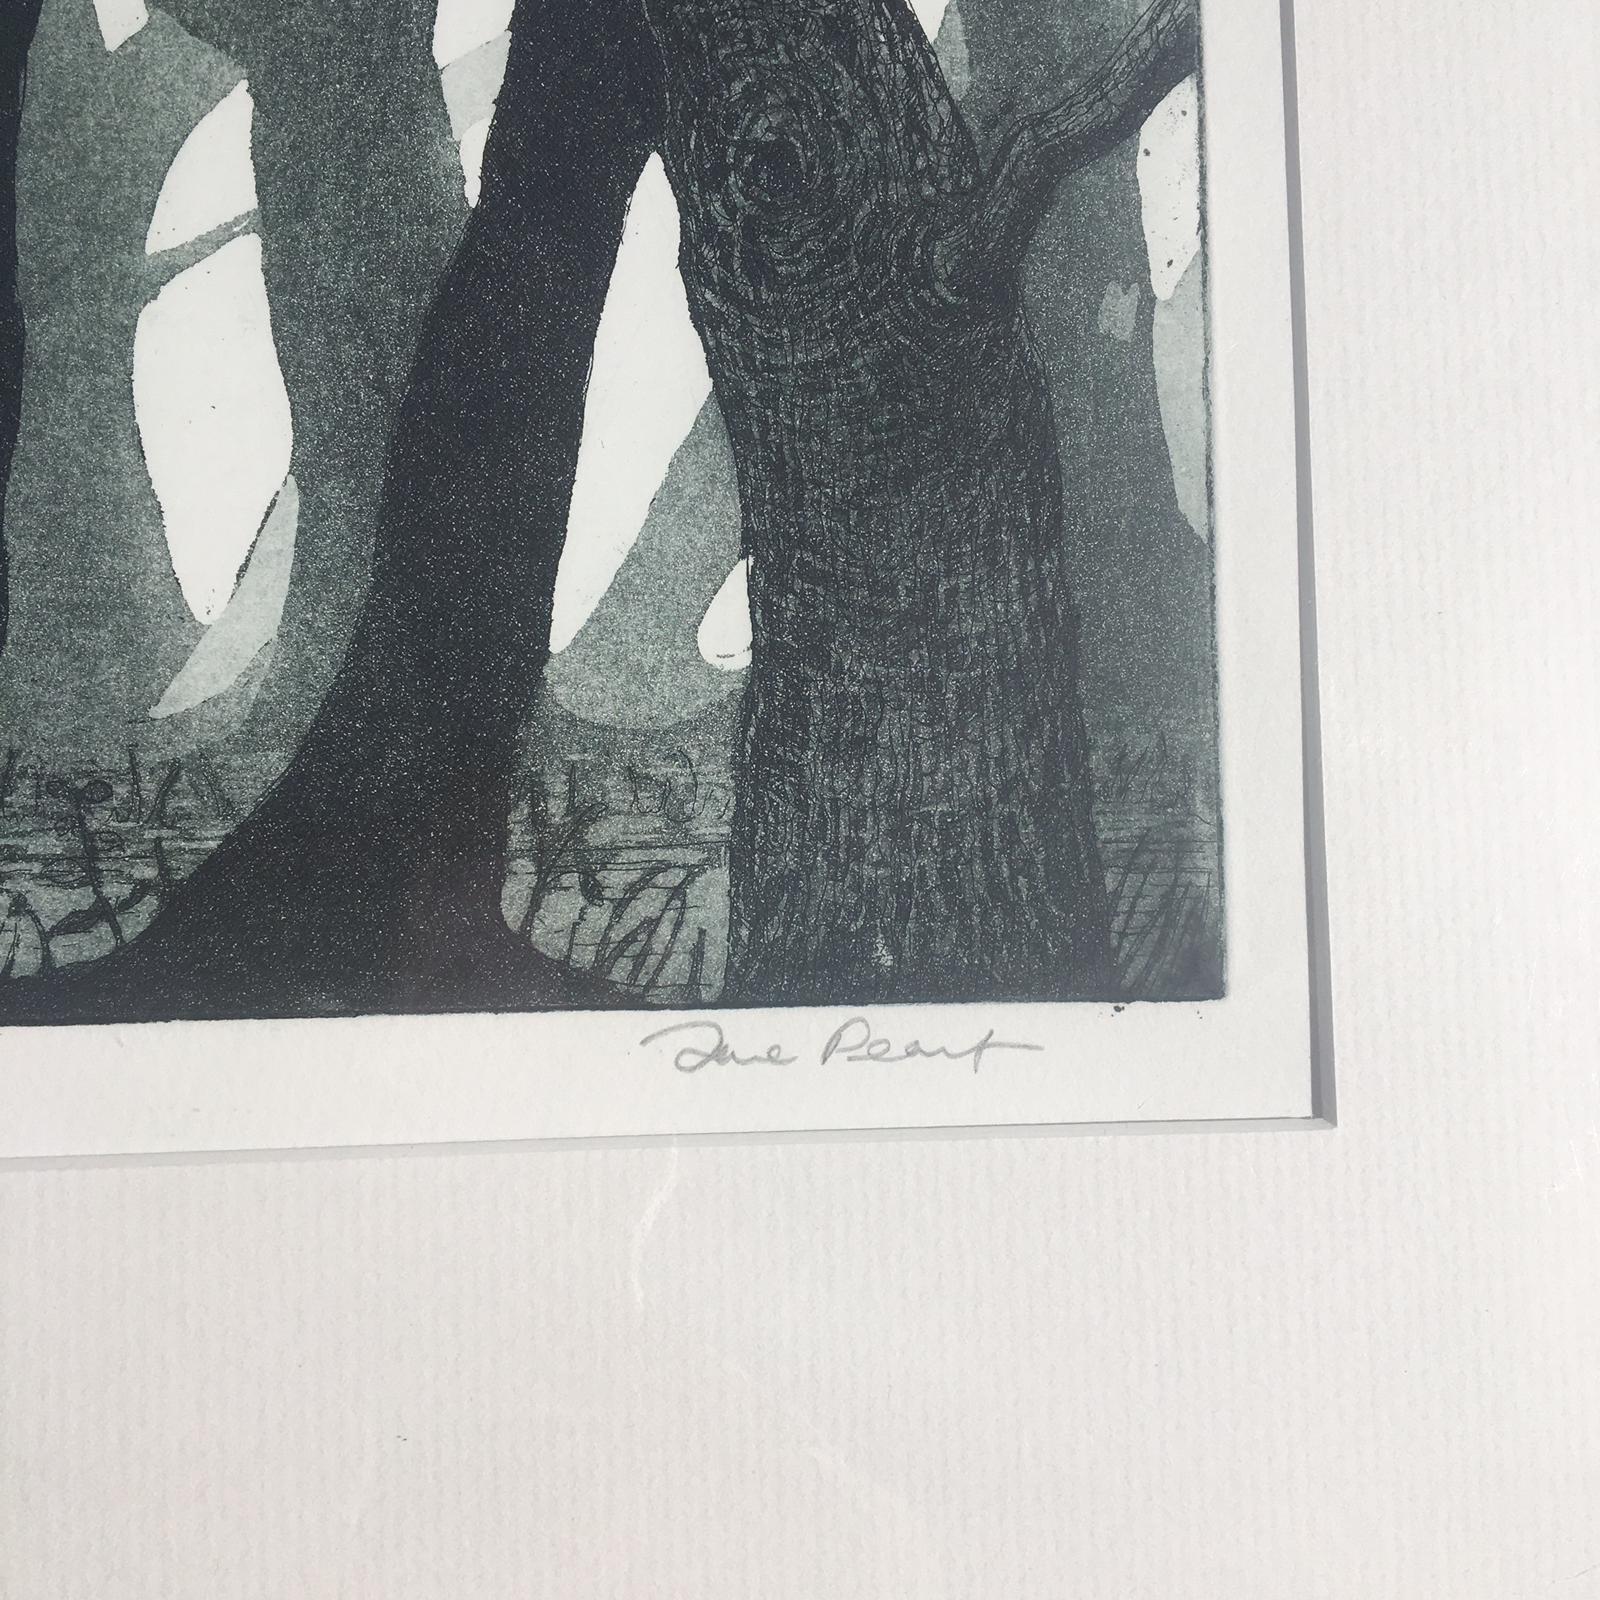 Jane Peart
Forest Glen
Limited Edition Etching Print
Edition of 100
Image Size: H 24cm x W 34cm
Signed
Sold Unframed

Please note that in situ images are purely an indication of how a piece may look.

Traditional copper plate etching with aquatint.